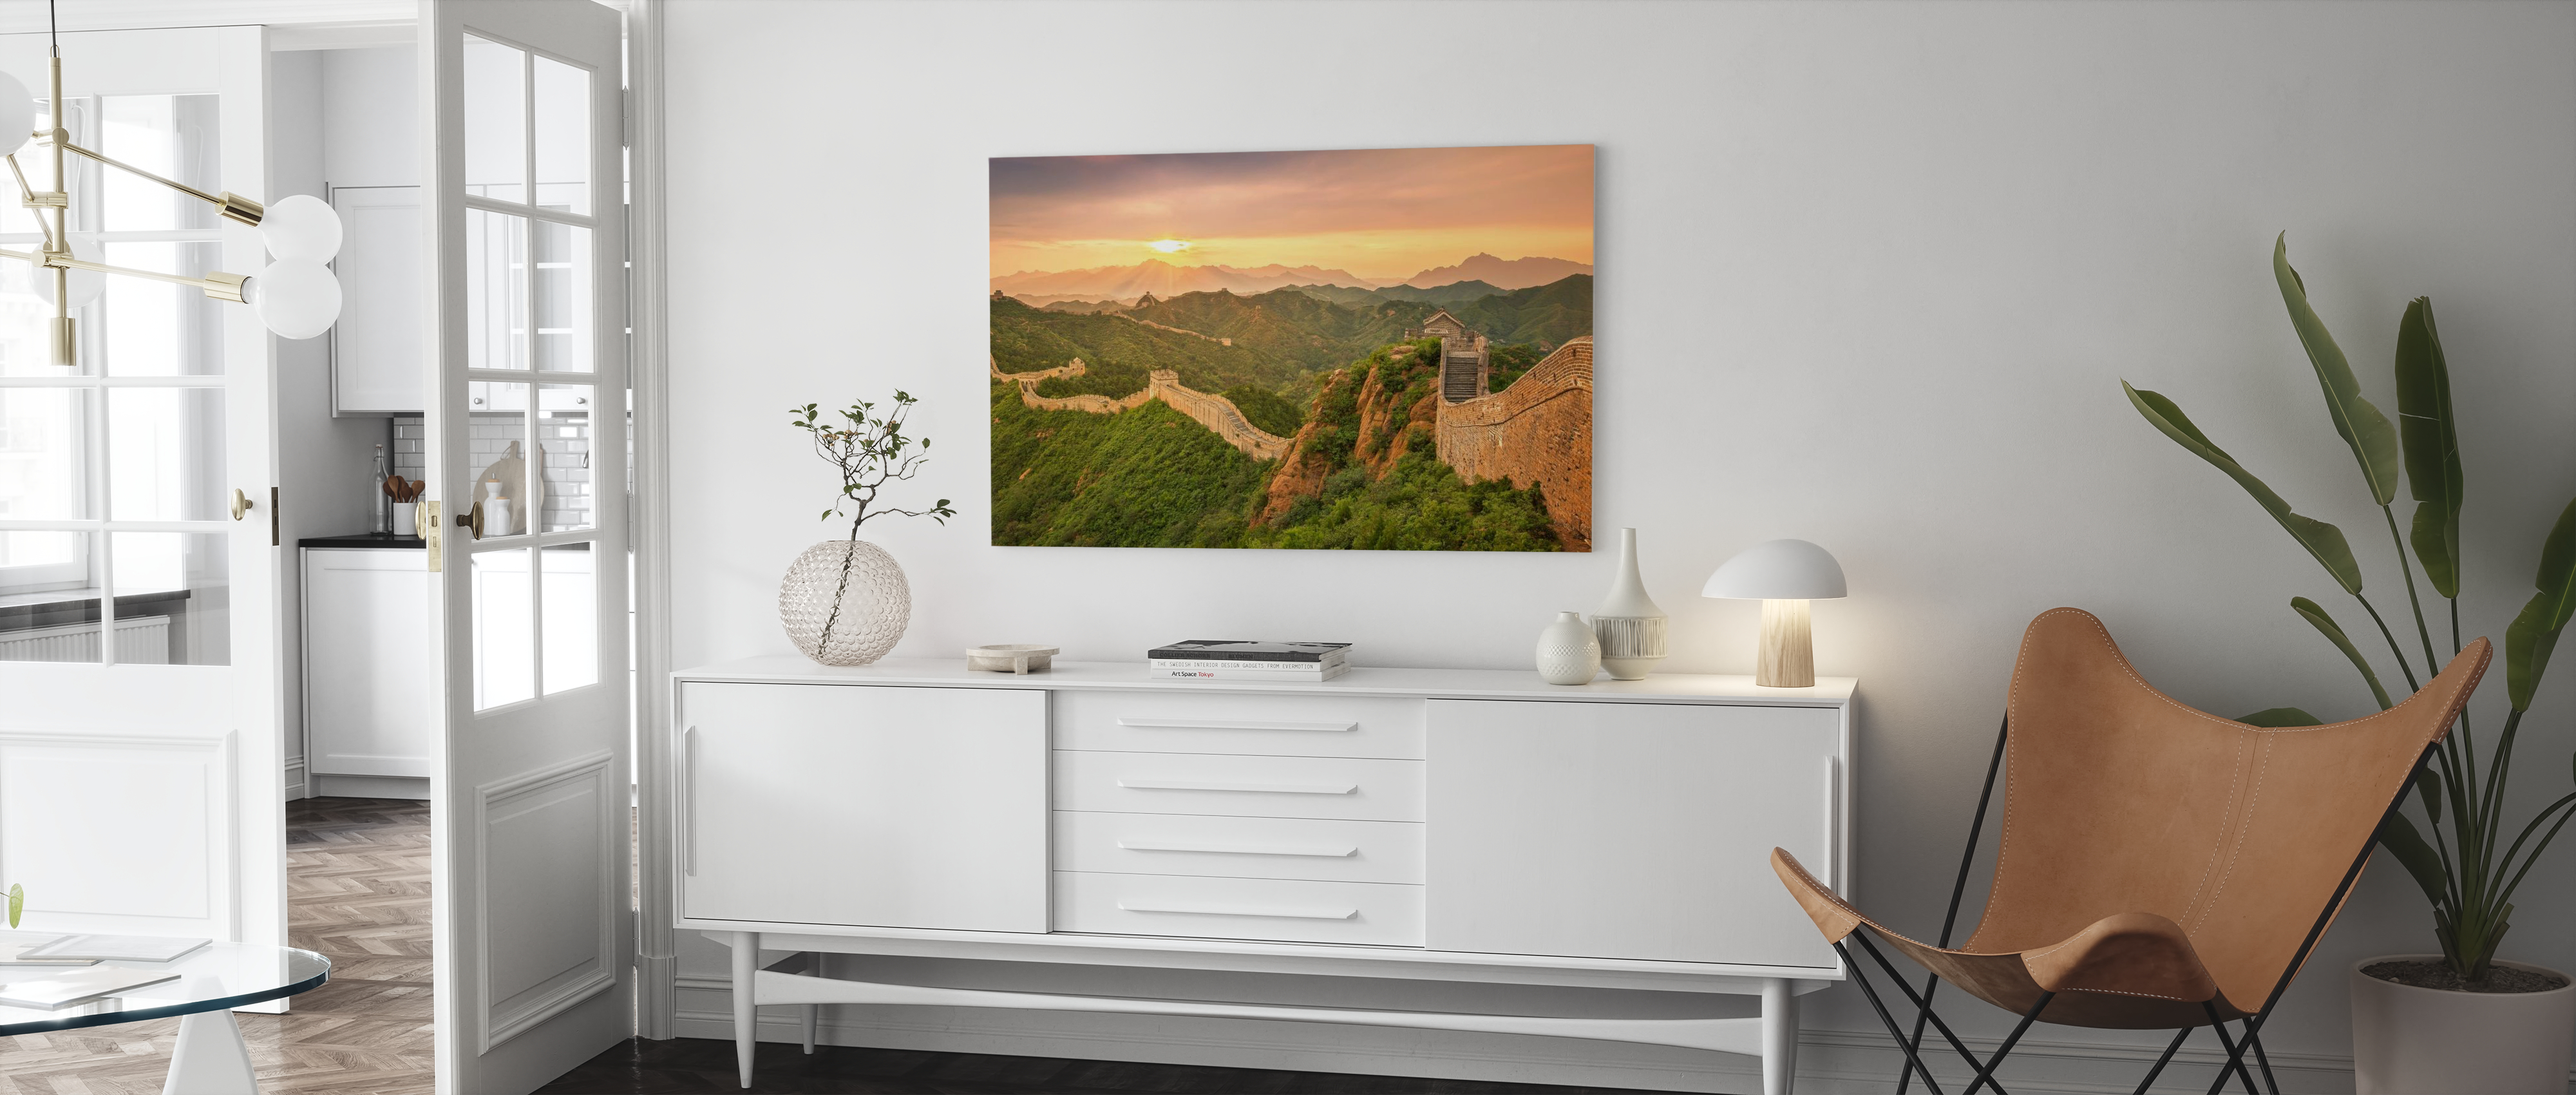 SC291 China Great Wall Sunrise Landscape Canvas Wall Art Large Picture Prints 